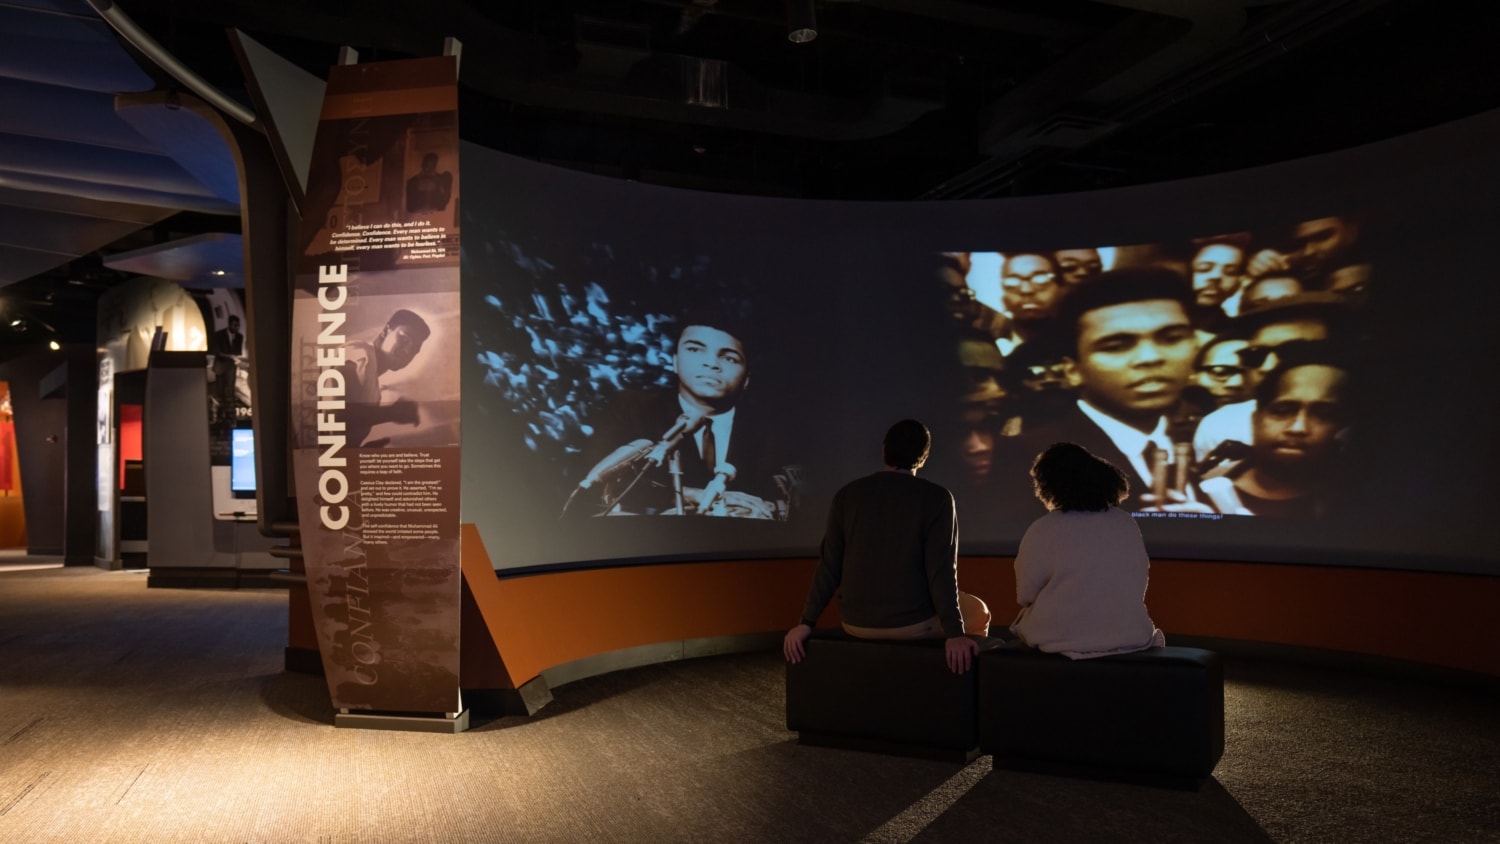 Two people sitting in a dark exhibit gallery watching a video about Muhammad Ali on a large projection screen